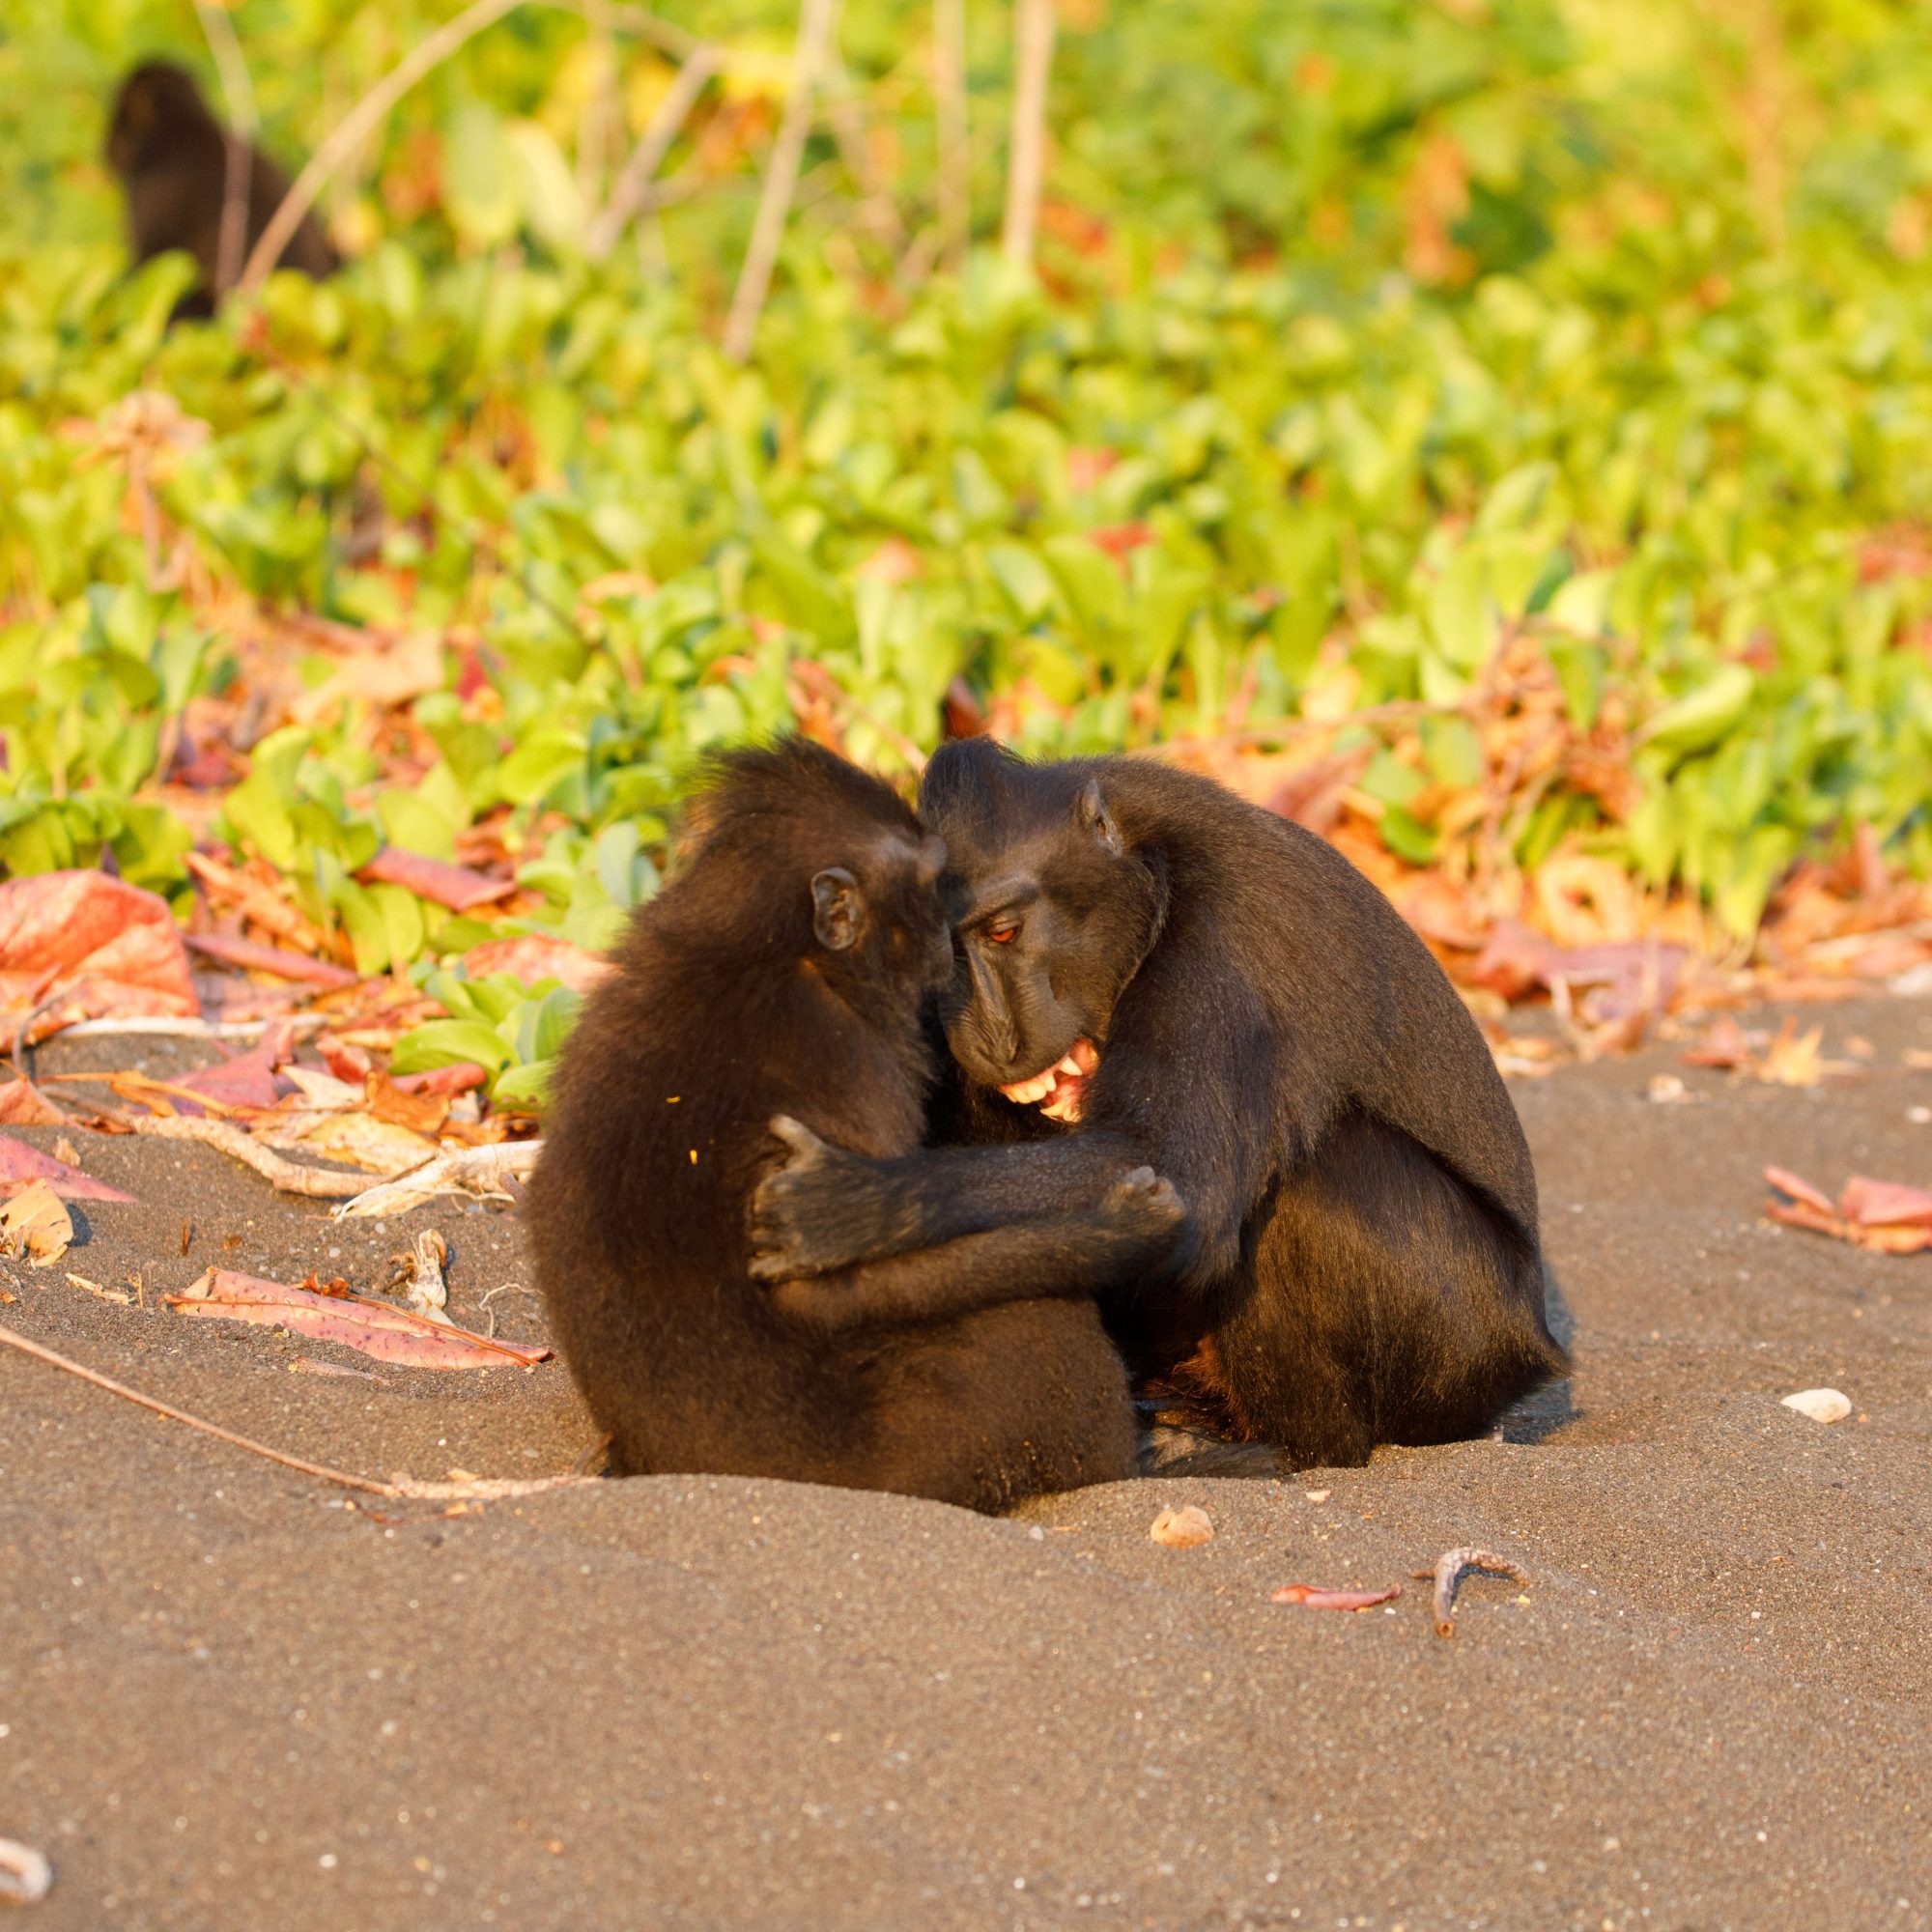 Young Crested Black Macaques playing on the beach – Sulawesi, Indonesia, 2019